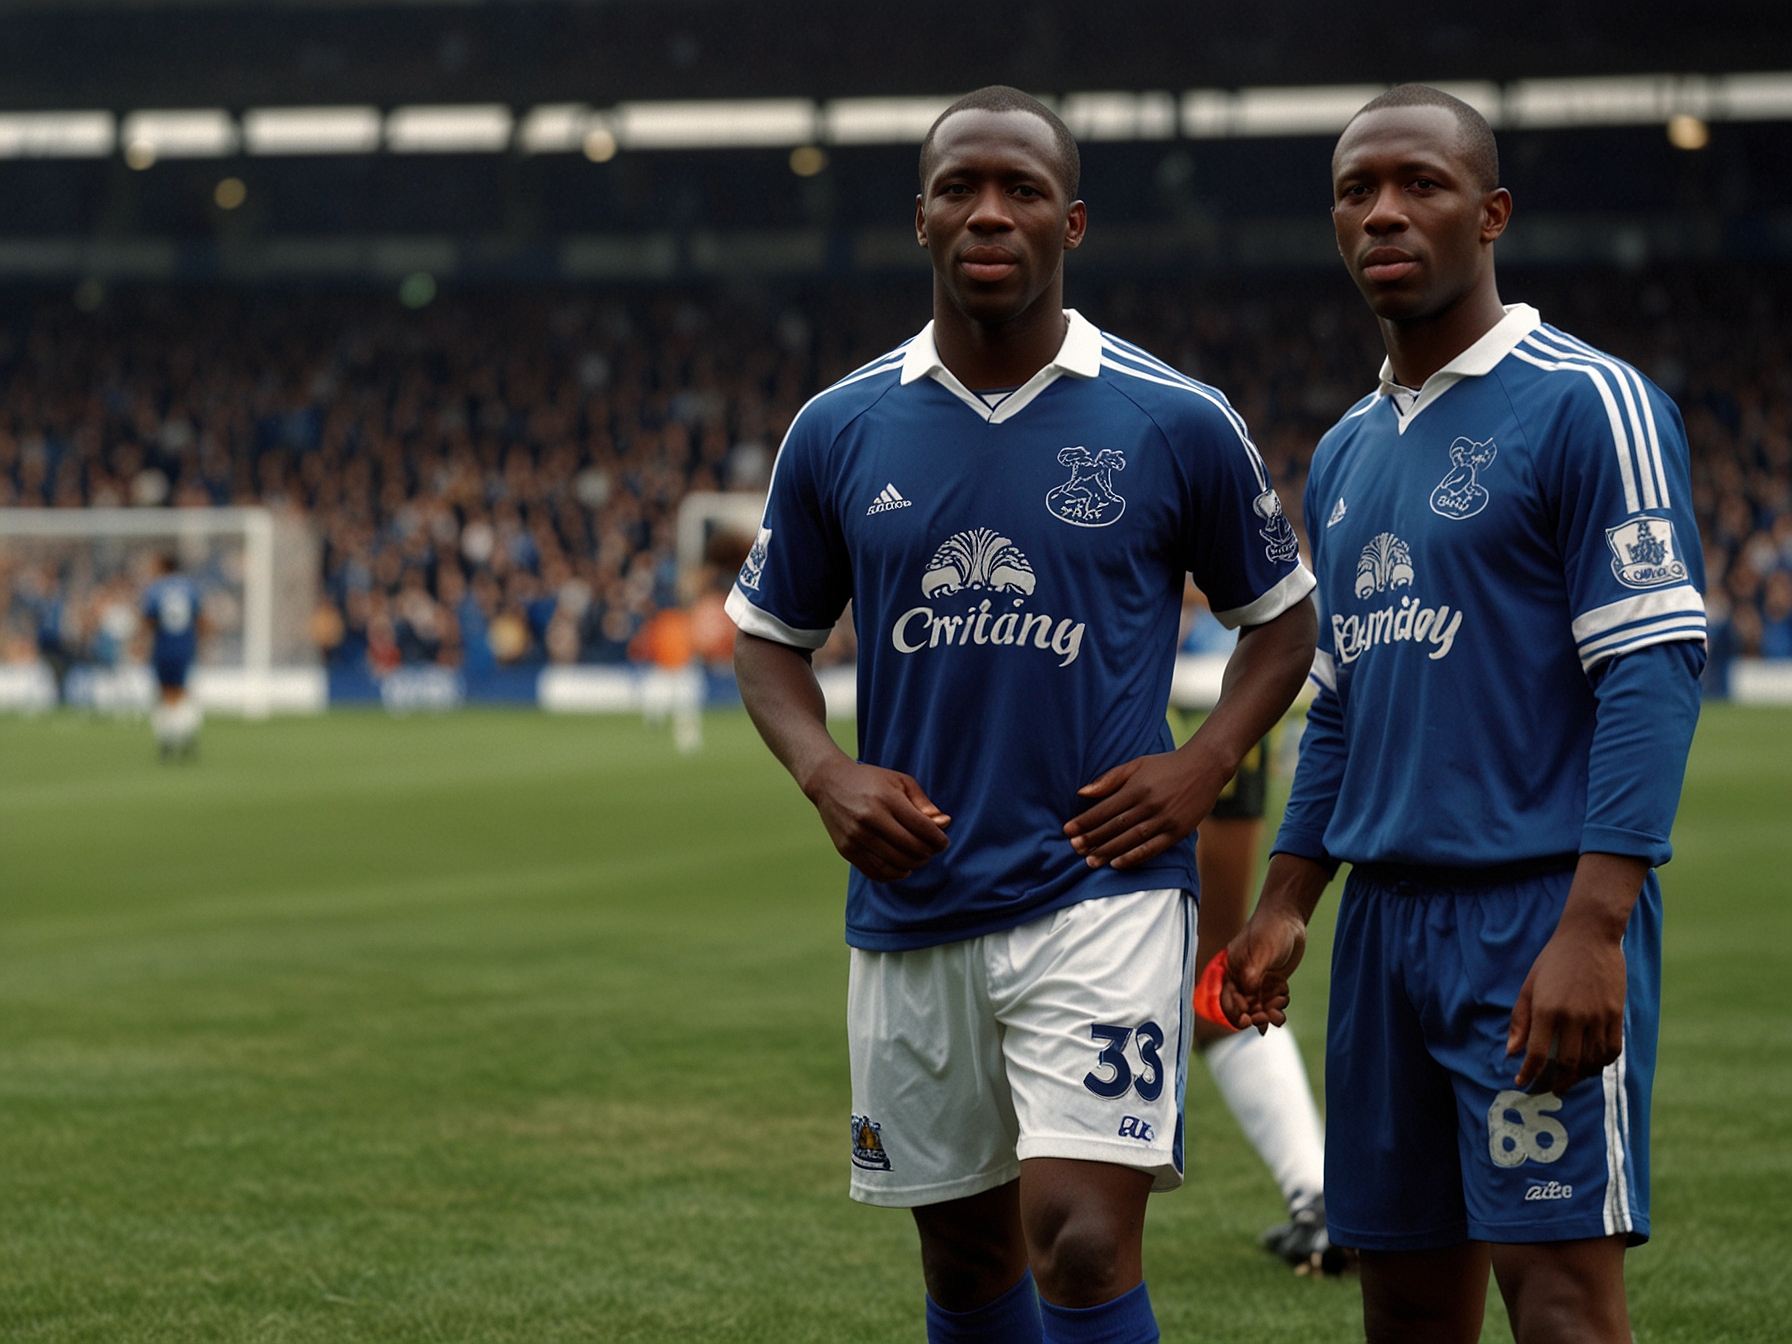 Kevin Campbell posing with his Everton teammates before a crucial match during his playing career.